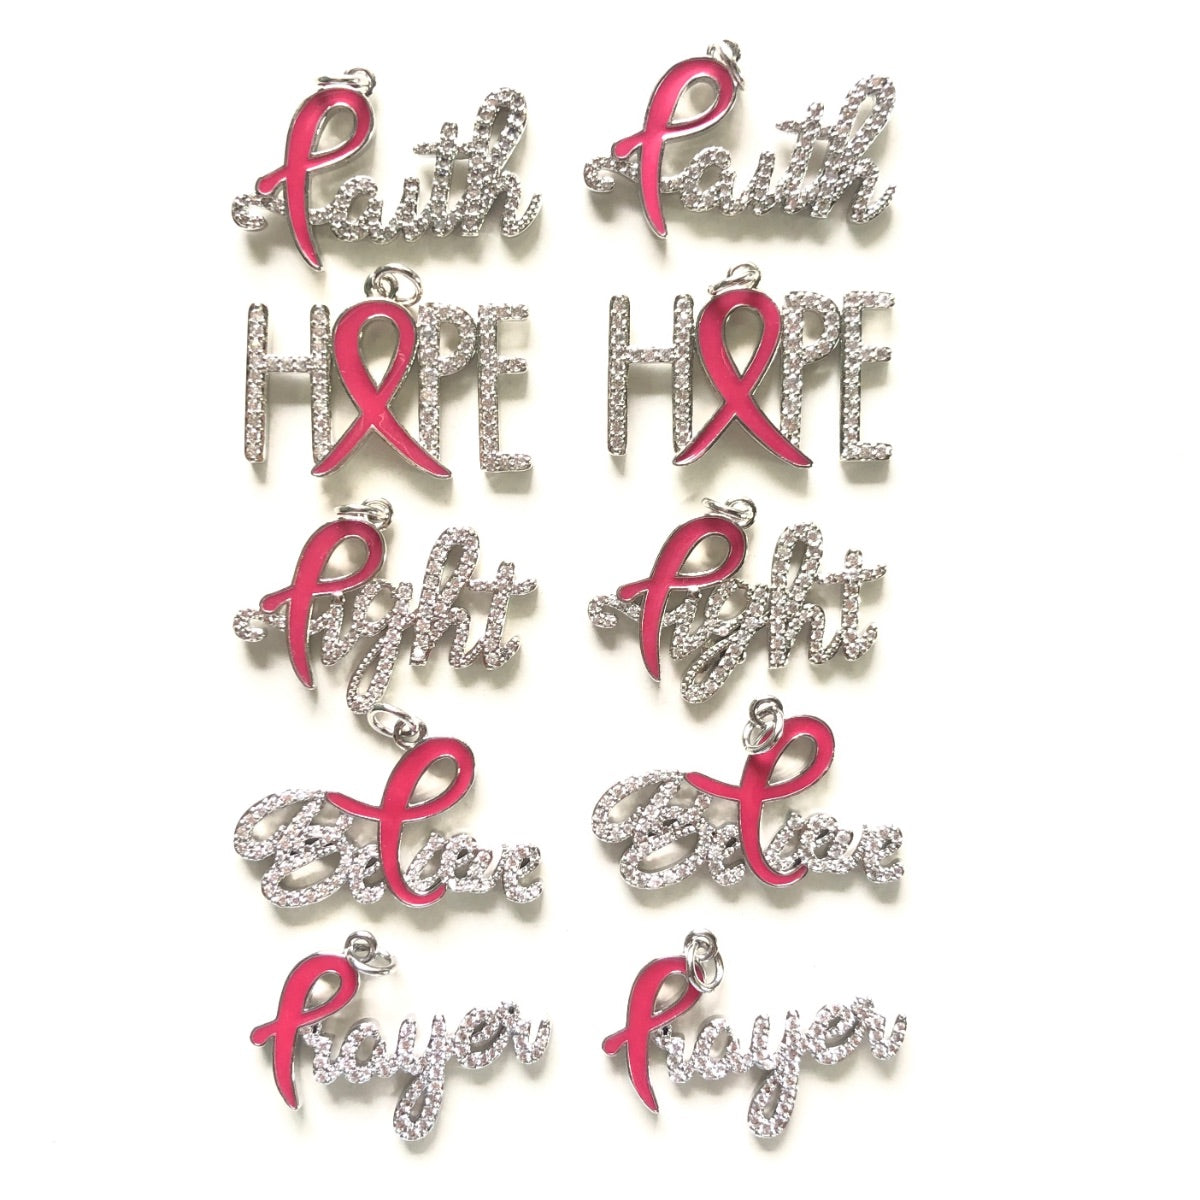 10pcs/lot CZ Pave Pink Ribbon Faith Hope Fight Brave Prayer Breast Cancer Awareness Word Charms Bundle Silver Set CZ Paved Charms Breast Cancer Awareness Mix Charms New Charms Arrivals Charms Beads Beyond